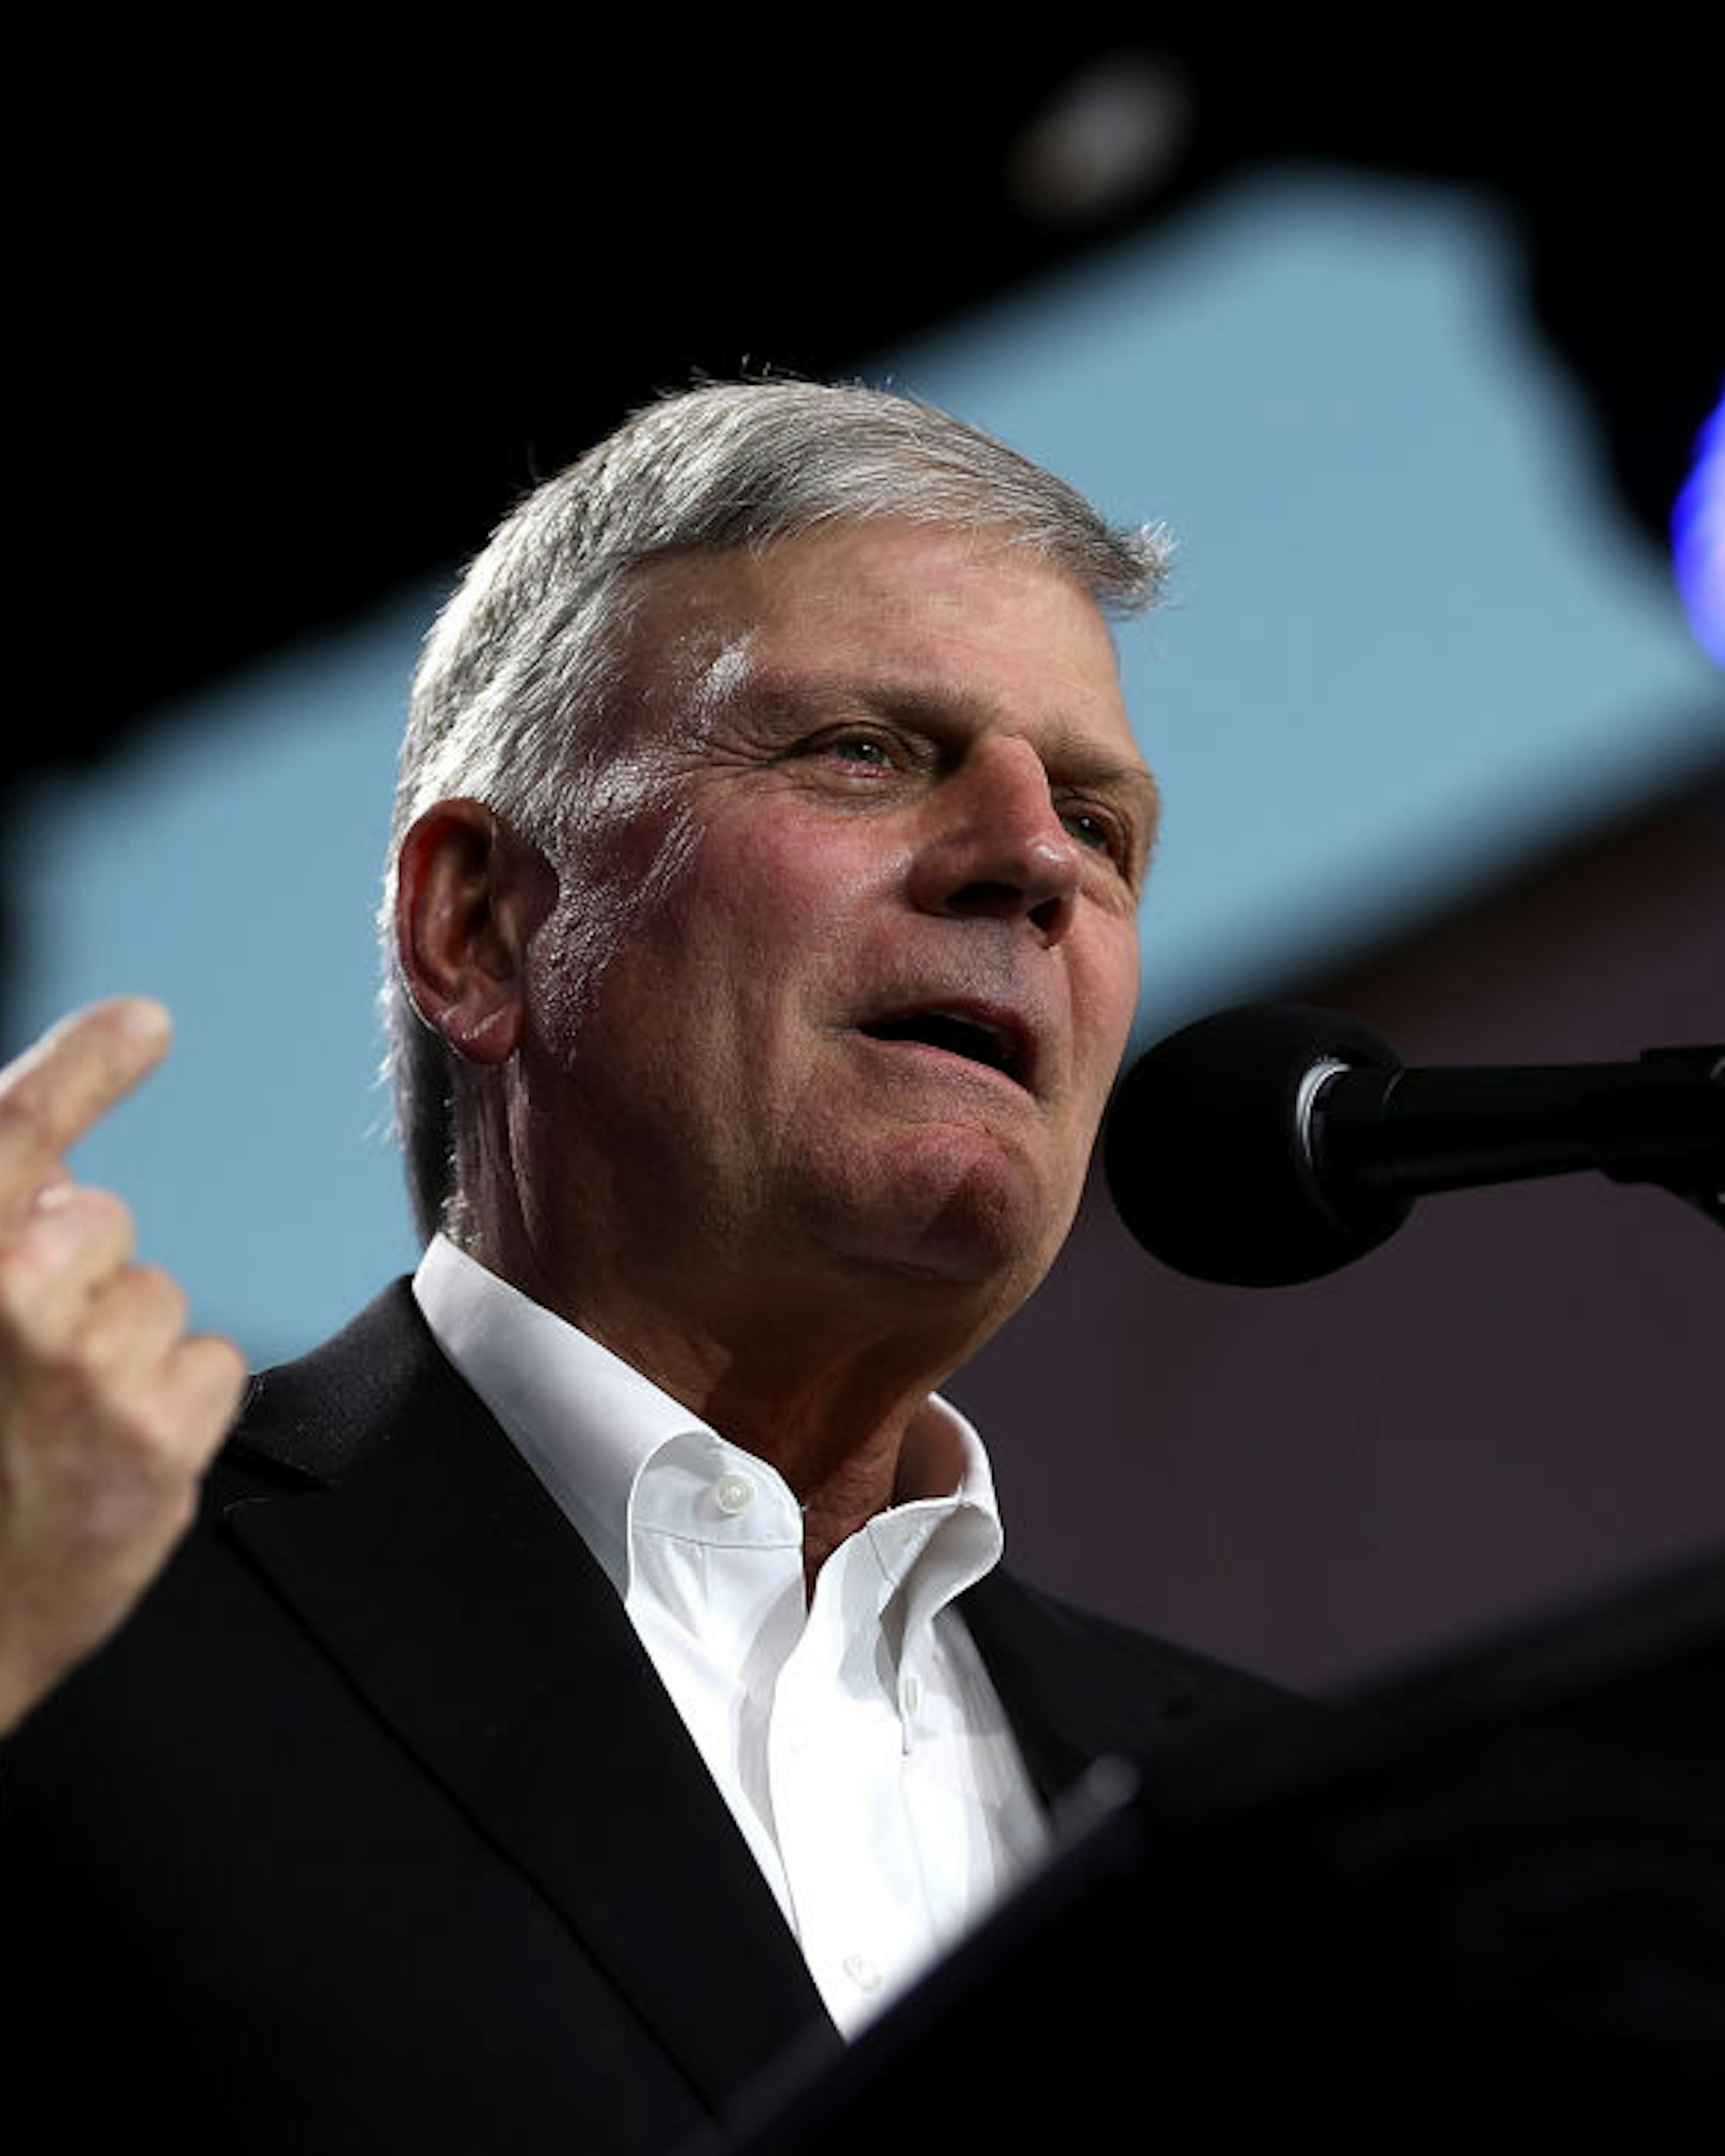 Rev. Franklin Graham speaks during Franklin Graham's "Decision America" California tour at the Stanislaus County Fairgrounds on May 29, 2018 in Turlock, California.